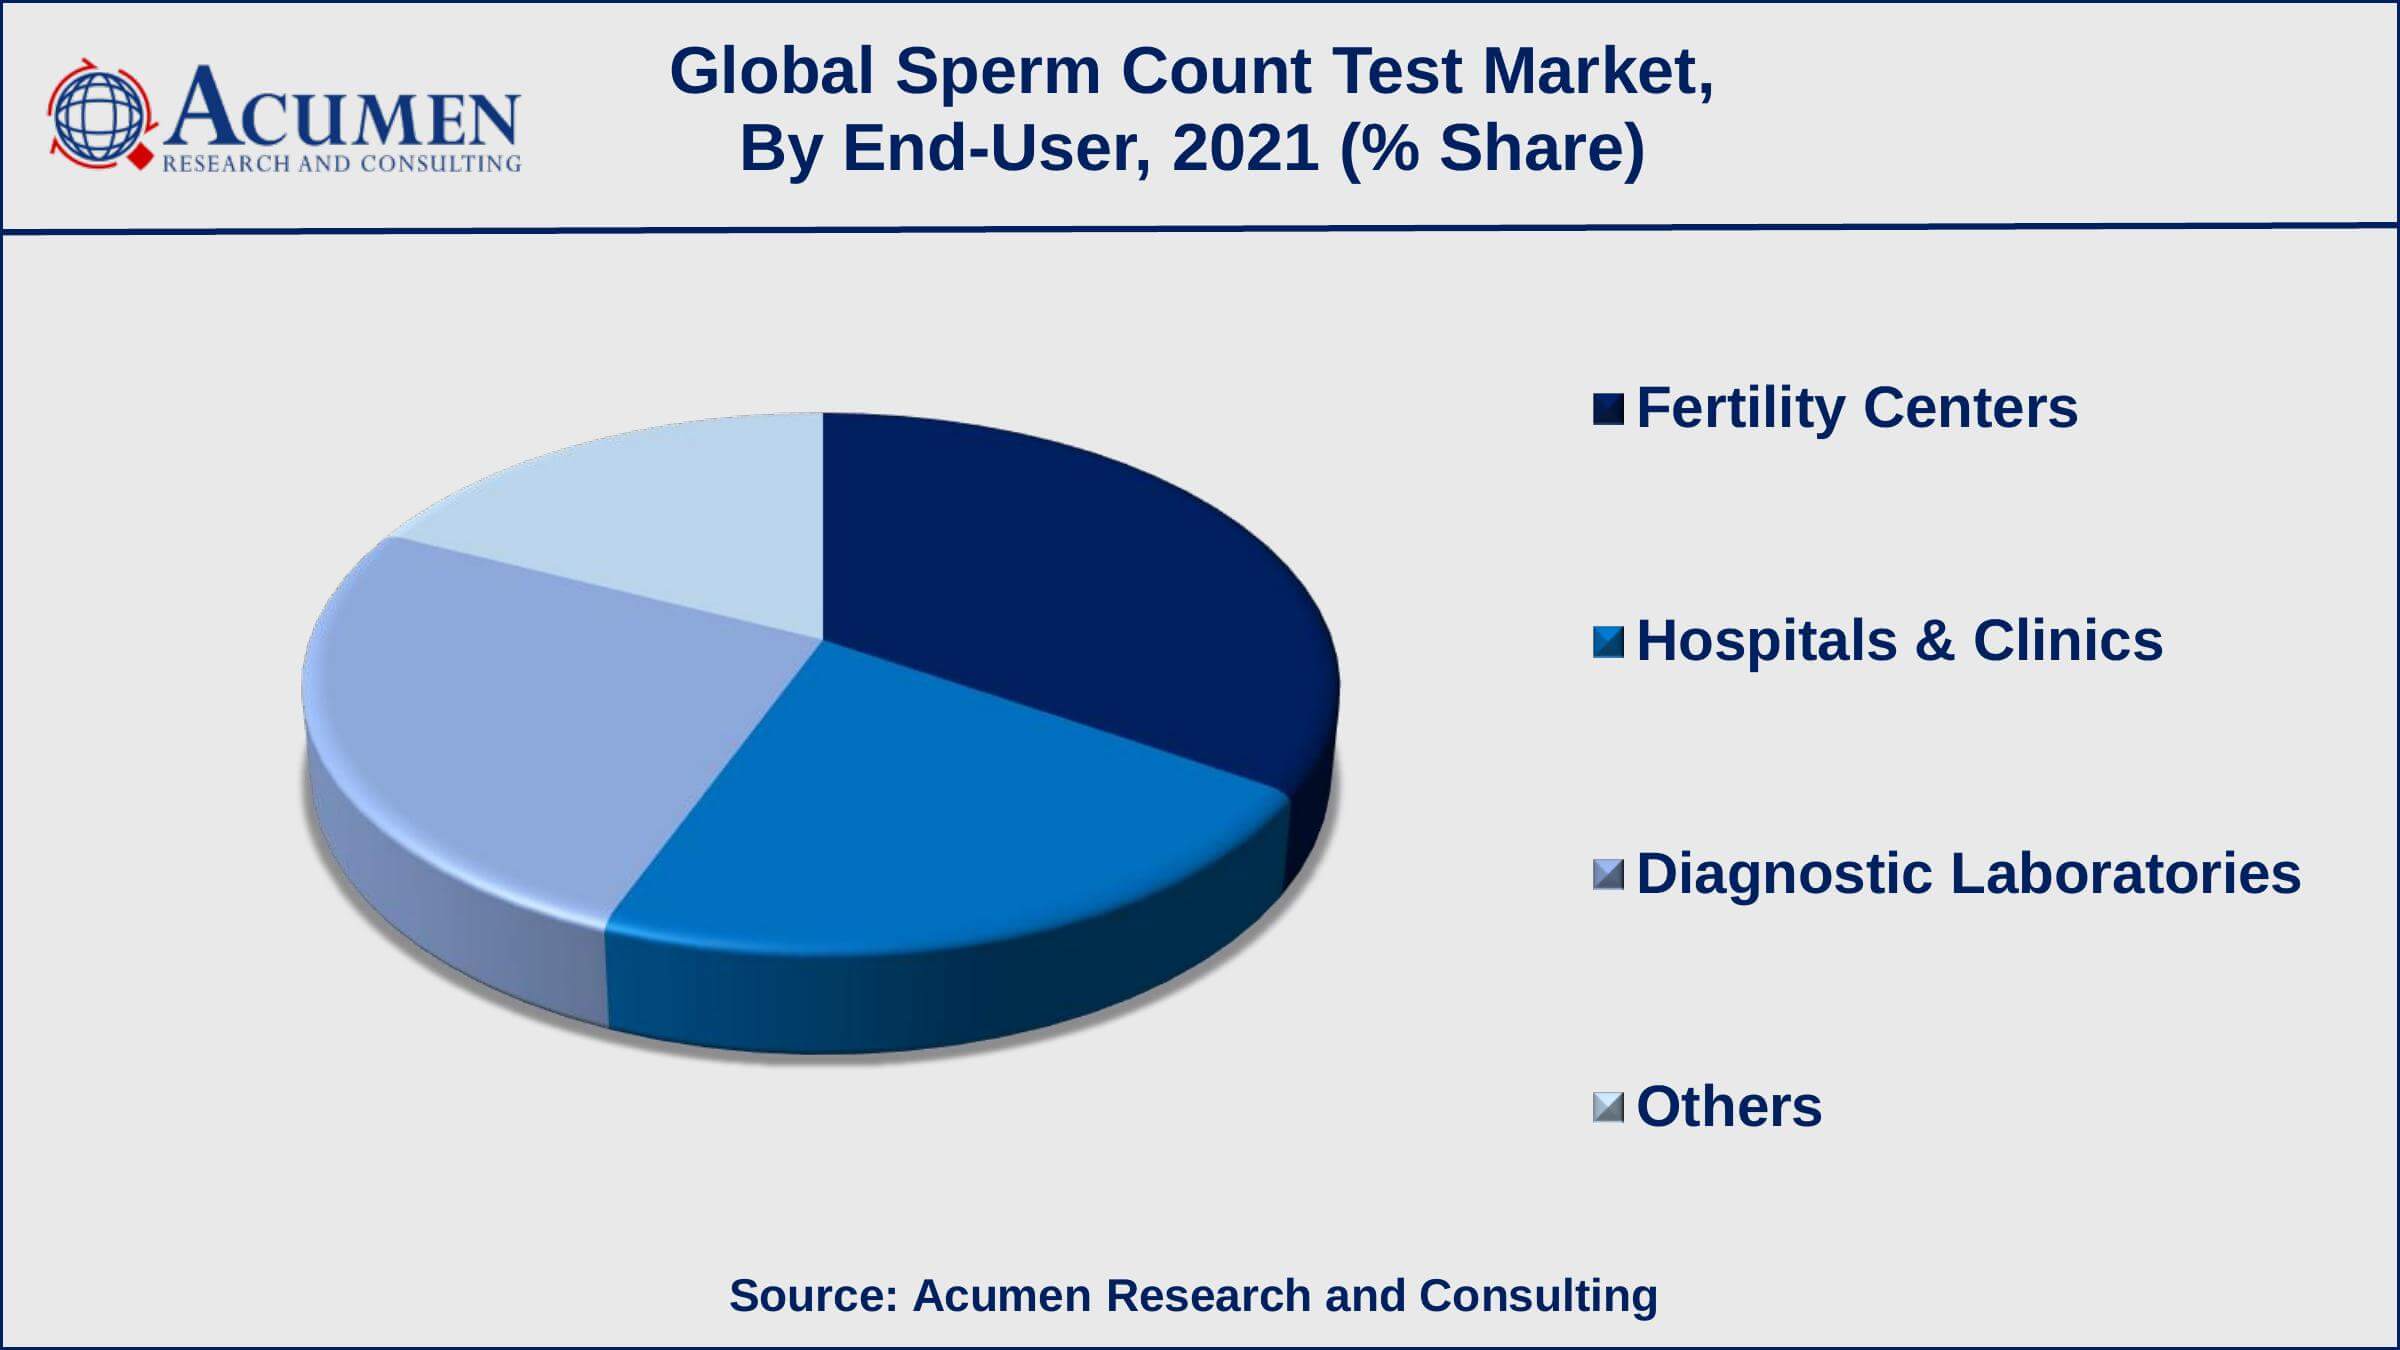 Among end-user, the fertility centers sub-segment occupied 34% in 2021